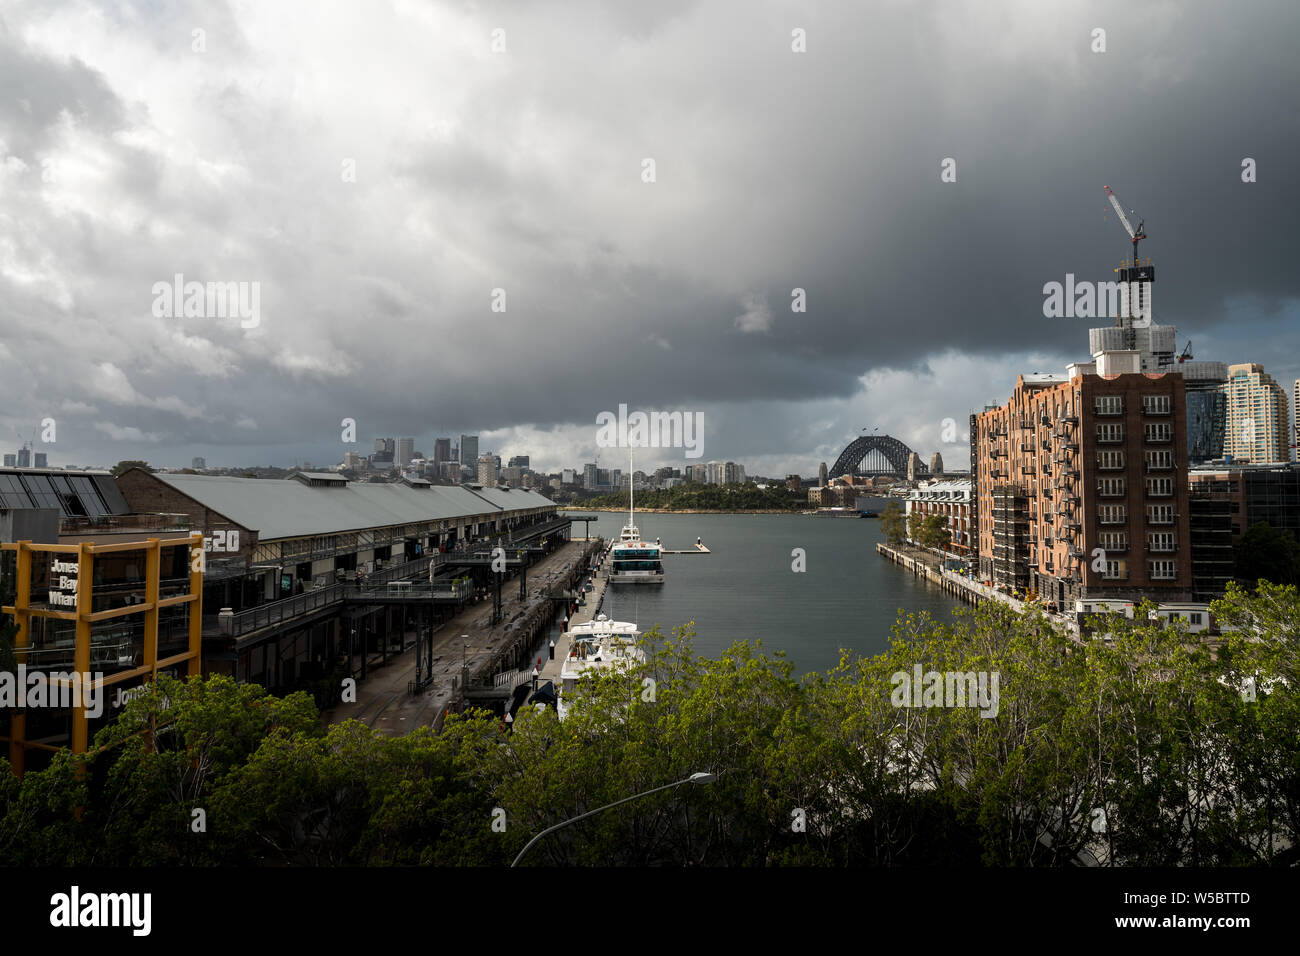 Pyrmont, New South Wales - JUNE 24th, 2019: Ominous clouds hang over Jones Bay Wharf with North Sydney visible in the background. Stock Photo